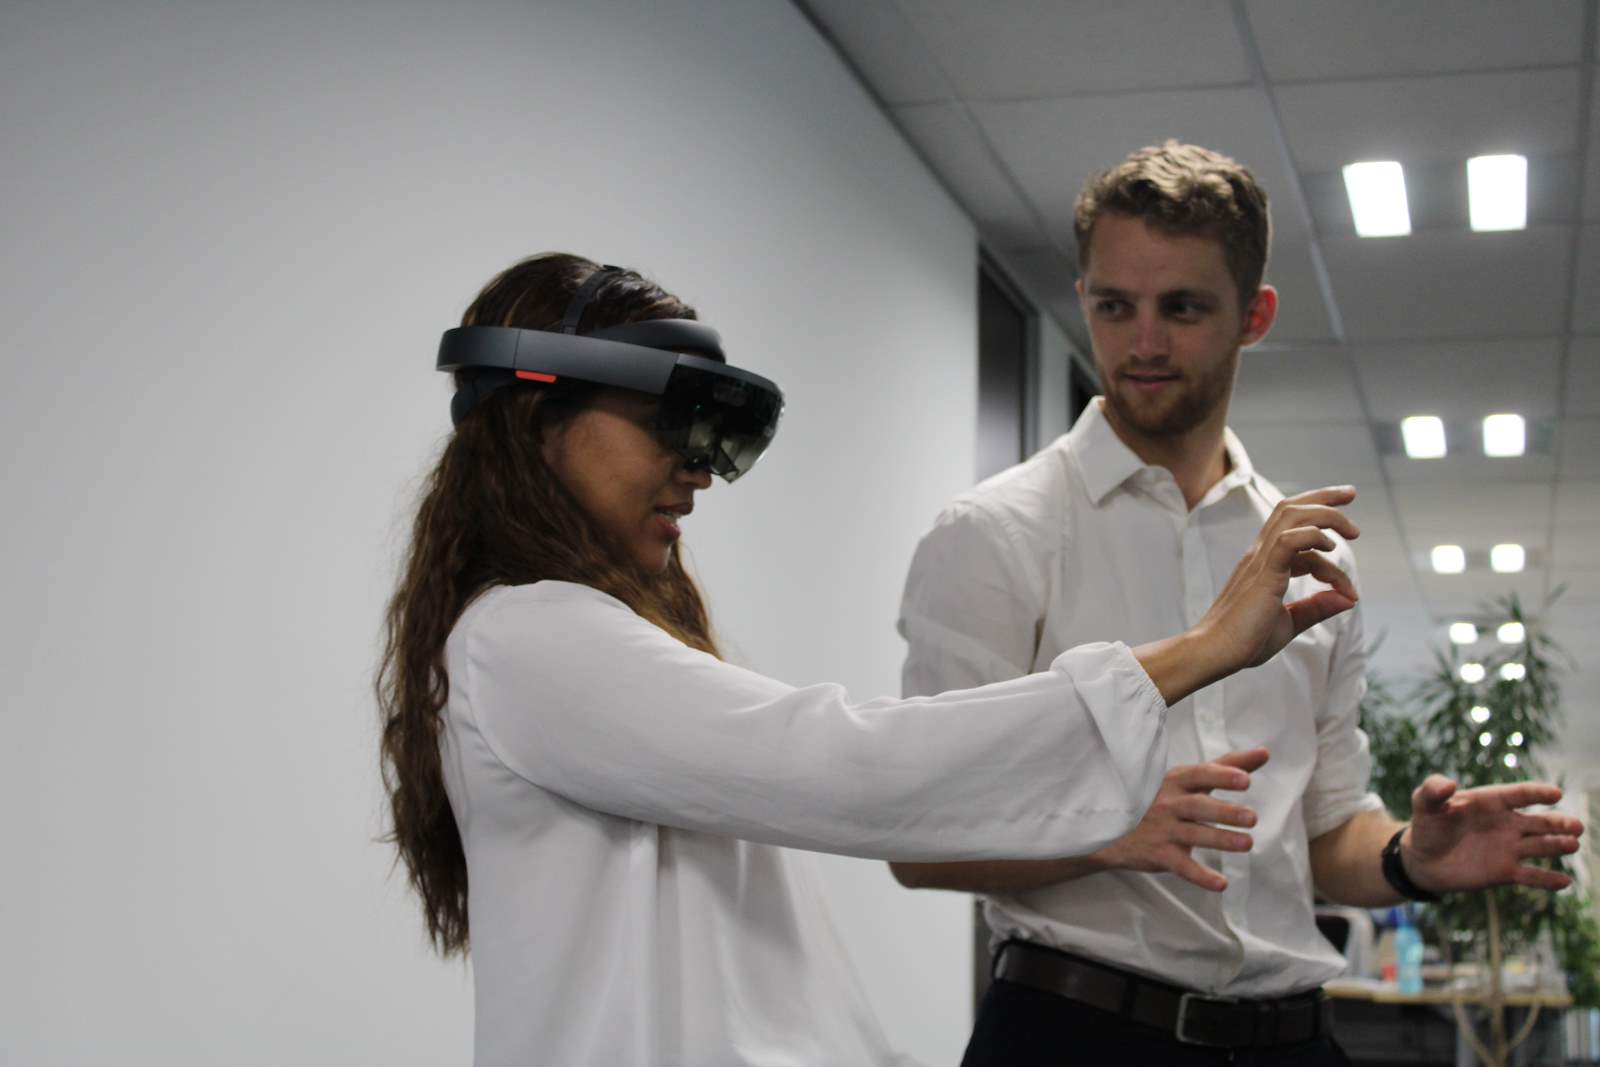 Interactive workshop on augmented and virtual reality, local office South Africa